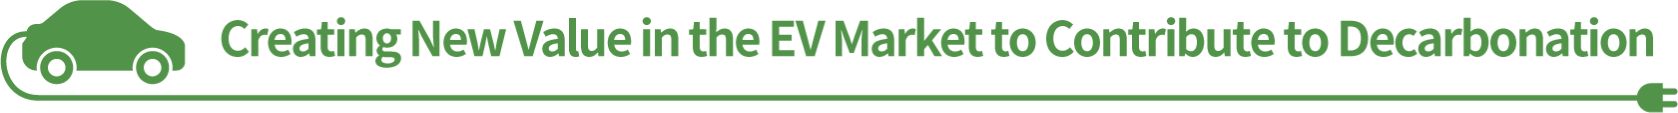 Creating New Value in the EV Market to Contribute to Decarbonation